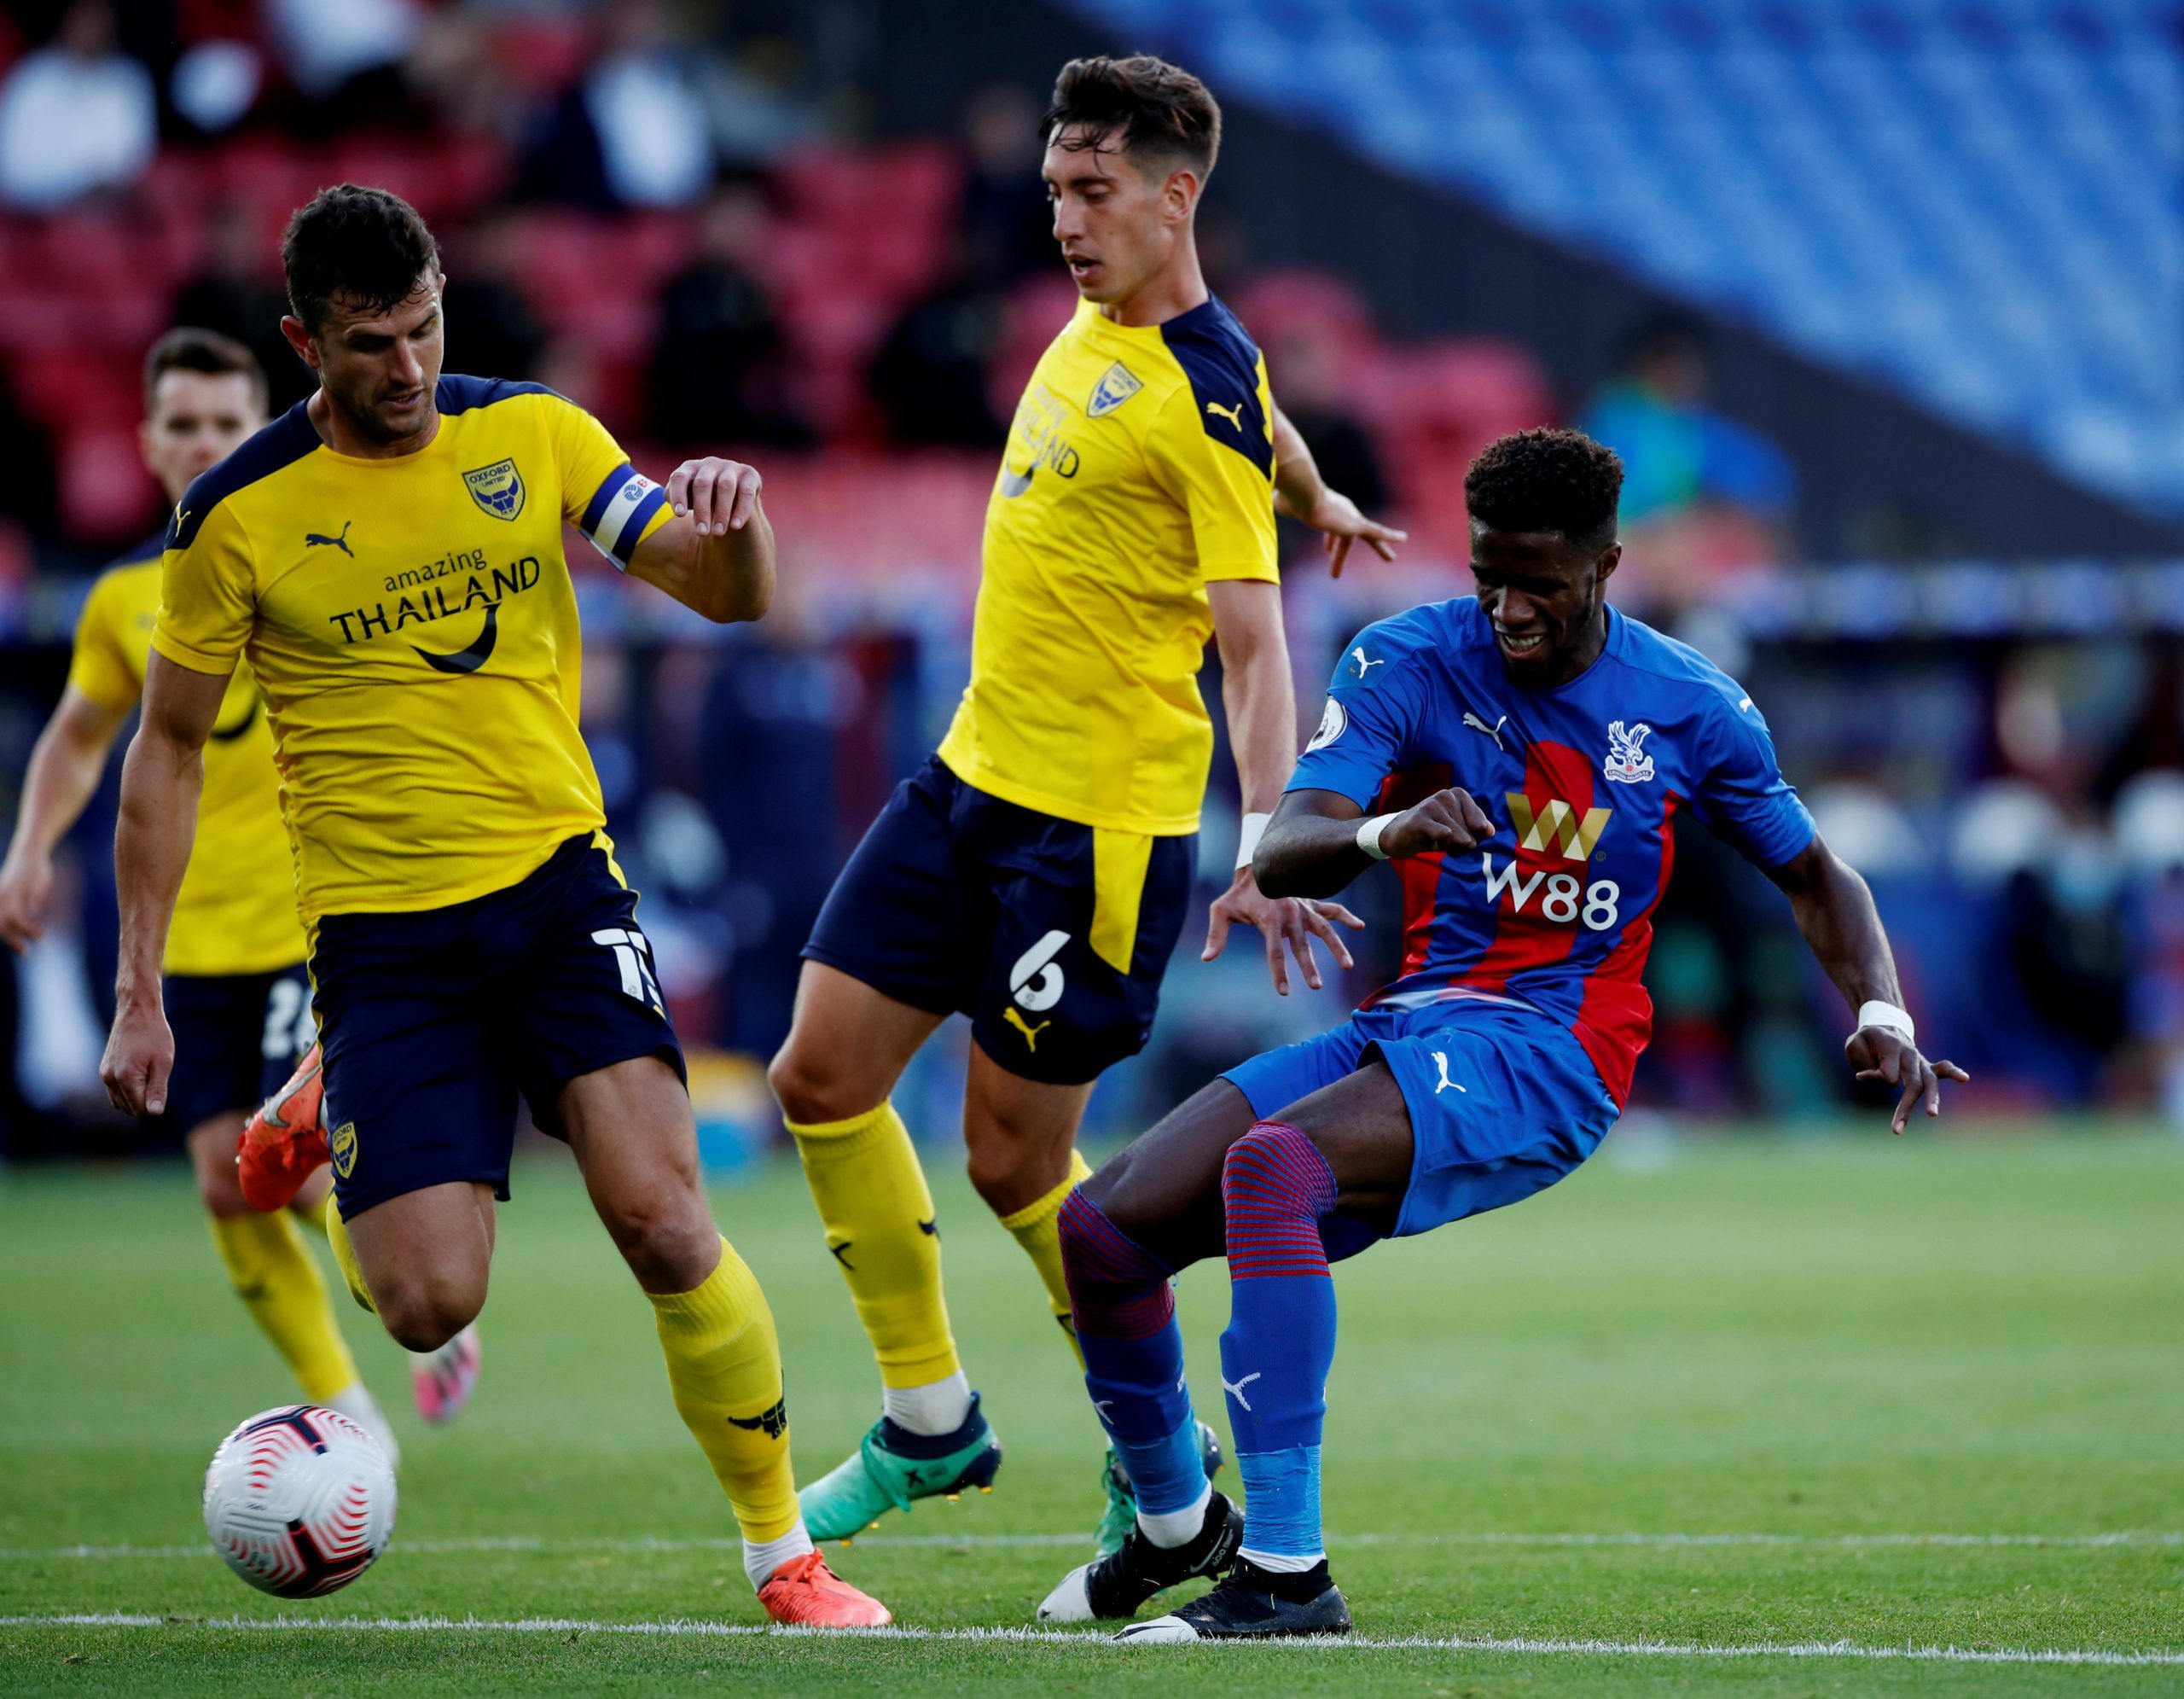 alex-gorrin-sunderland-afc-transfer-news-alex-neil-summer-latest-wycombe-wanderers-league-one-stadium-of-light-wembleySoccer Football - Pre Season Friendly - Crystal Palace v Oxford United - Selhurst Park, London, Britain - August 25, 2020  Crystal Palace's Wilfried Zaha in action with Oxford United's John Mousinho and Alejandro Rodriguez Gorrin, as play resumes behind closed doors following the outbreak of the coronavirus disease (COVID-19)  Action Images via Reuters/Paul Childs